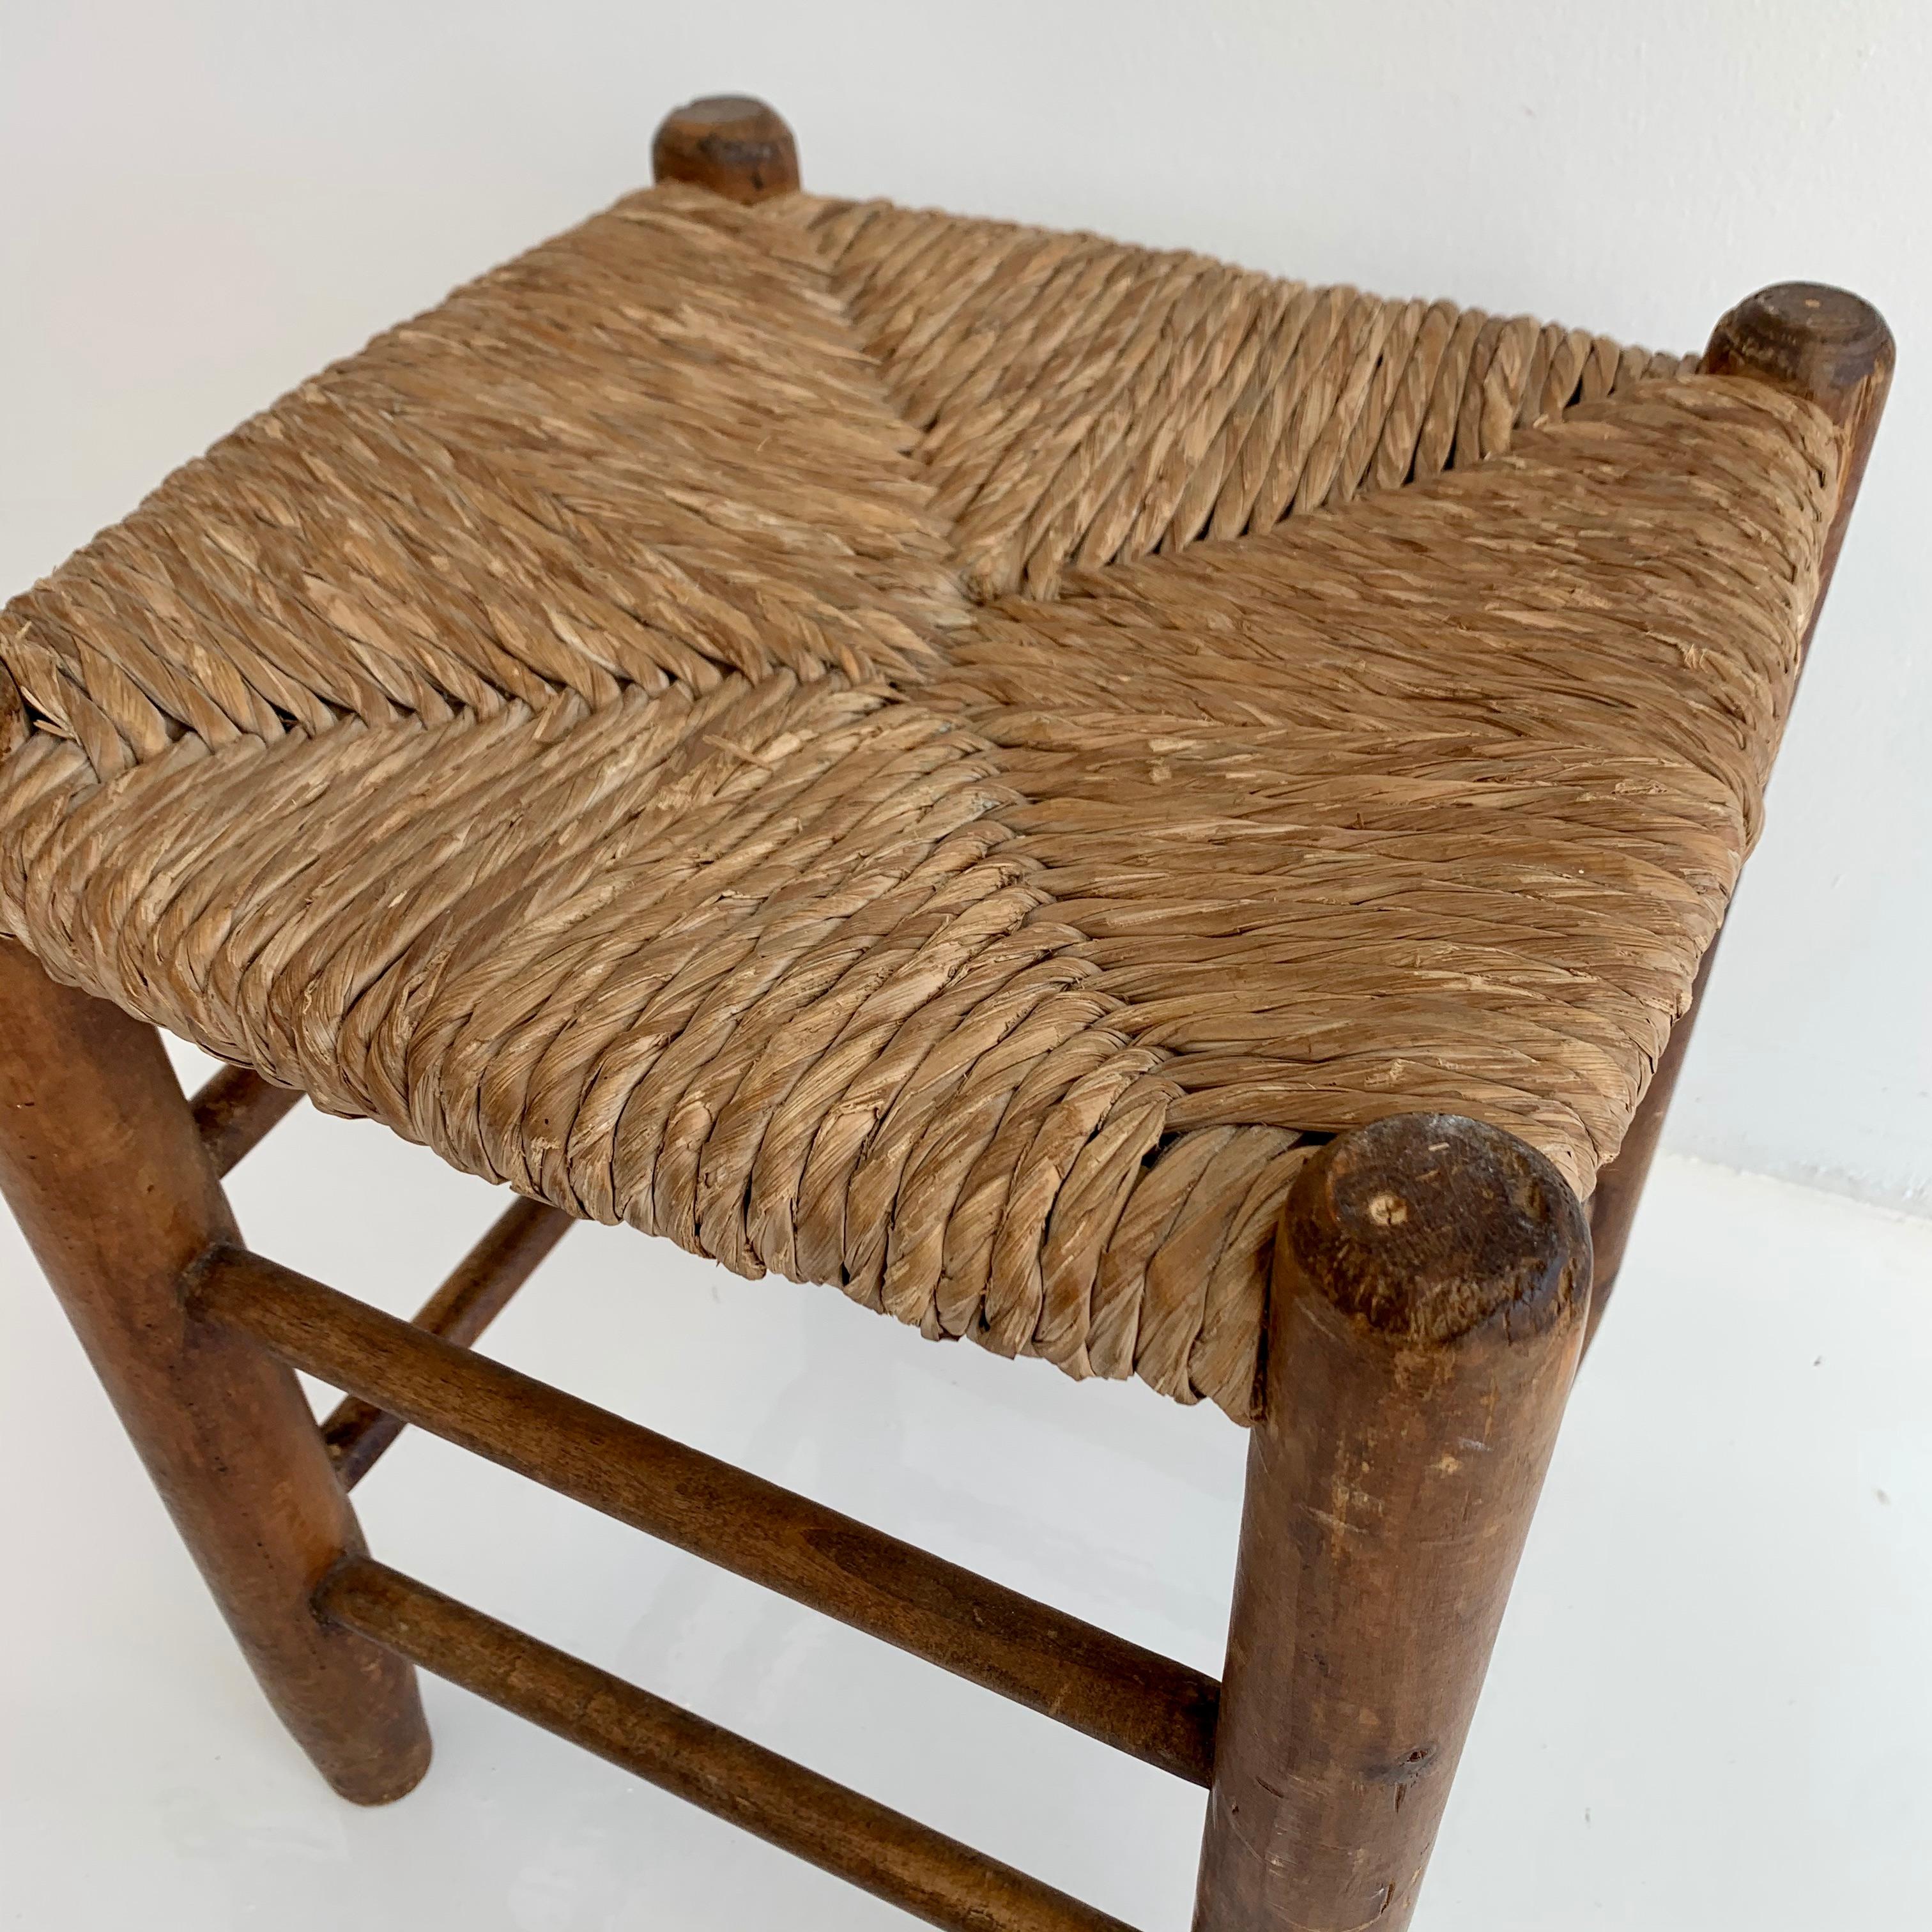 Handsome wood stool from France in the style of Charlotte Perriand. Oak four post frame with straw seat and wooden dowels. No hardware or screws. Great vintage stool.